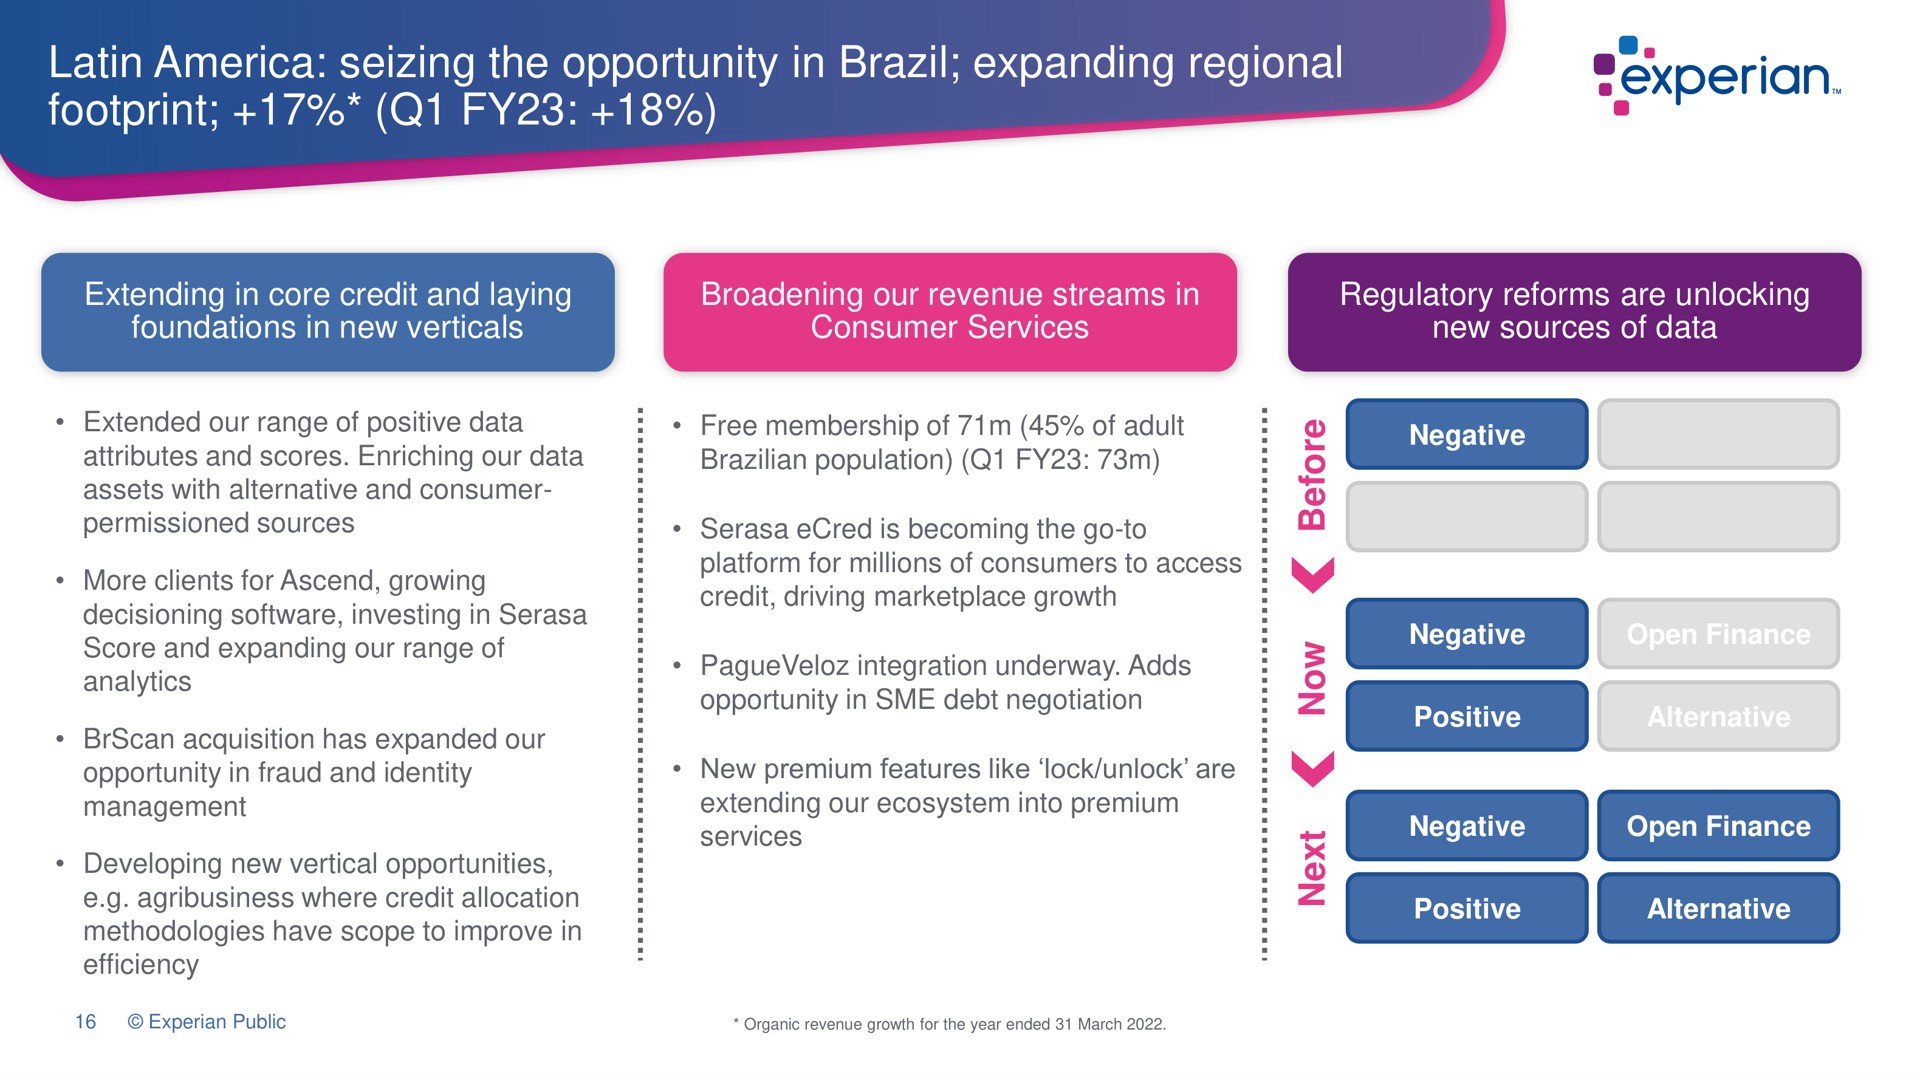 seizing the opportunity in brazil expanding regional footprint extending in core credit and laying foundations in new verticals broadening our revenue streams in consumer services regulatory reforms are unlocking new sources of data an | Experian